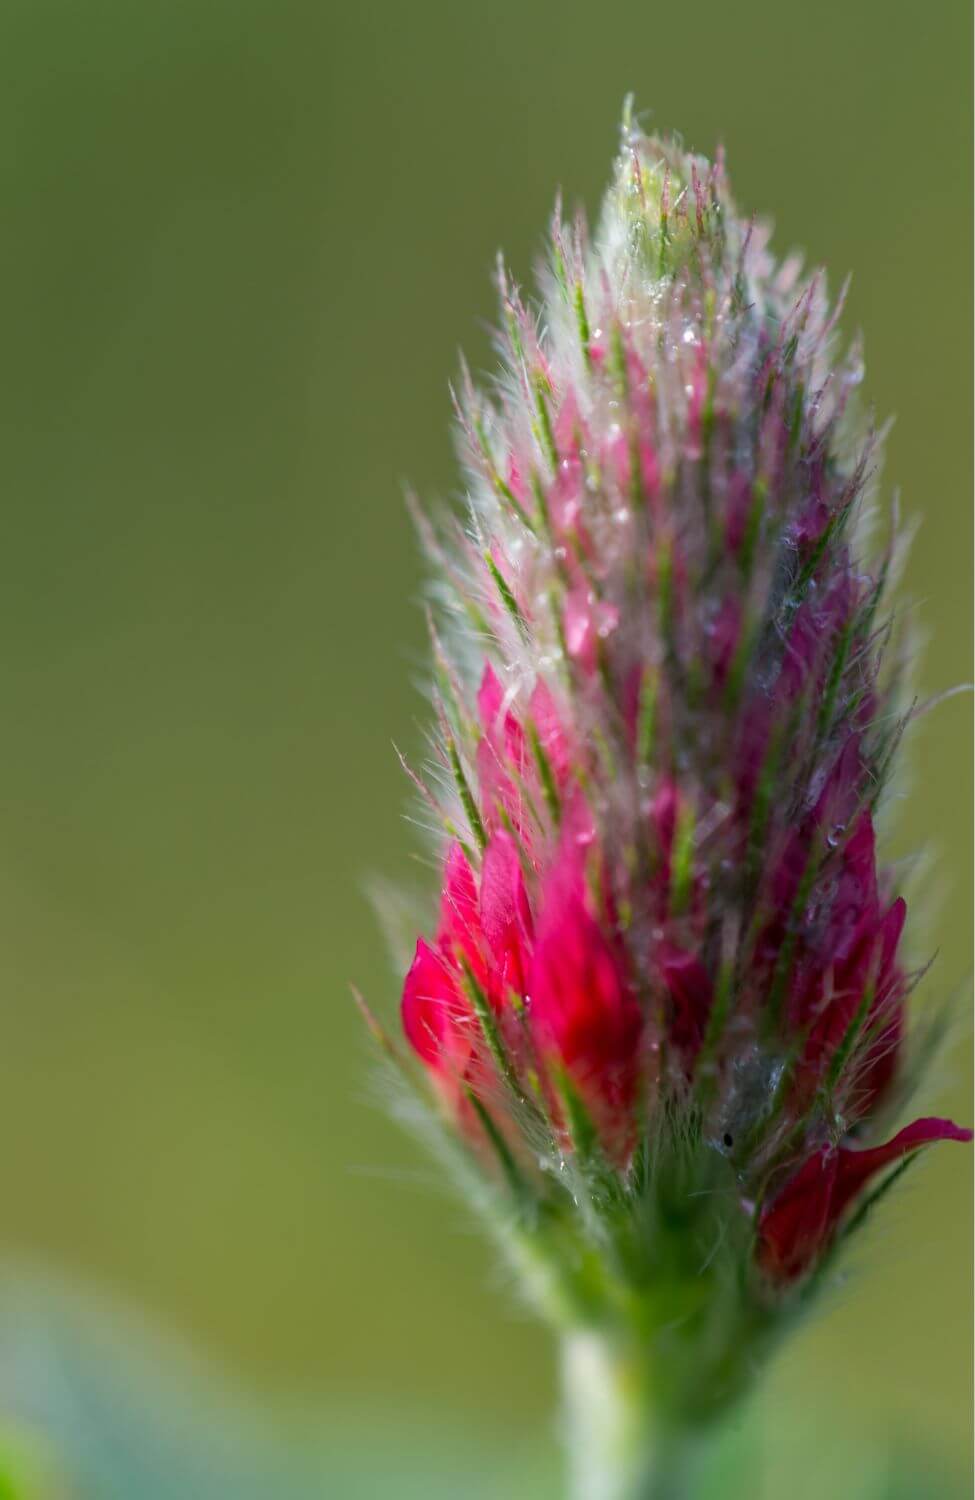 Red Crimson Clover Seeds - Grow a sea of vibrant red blooms in your garden